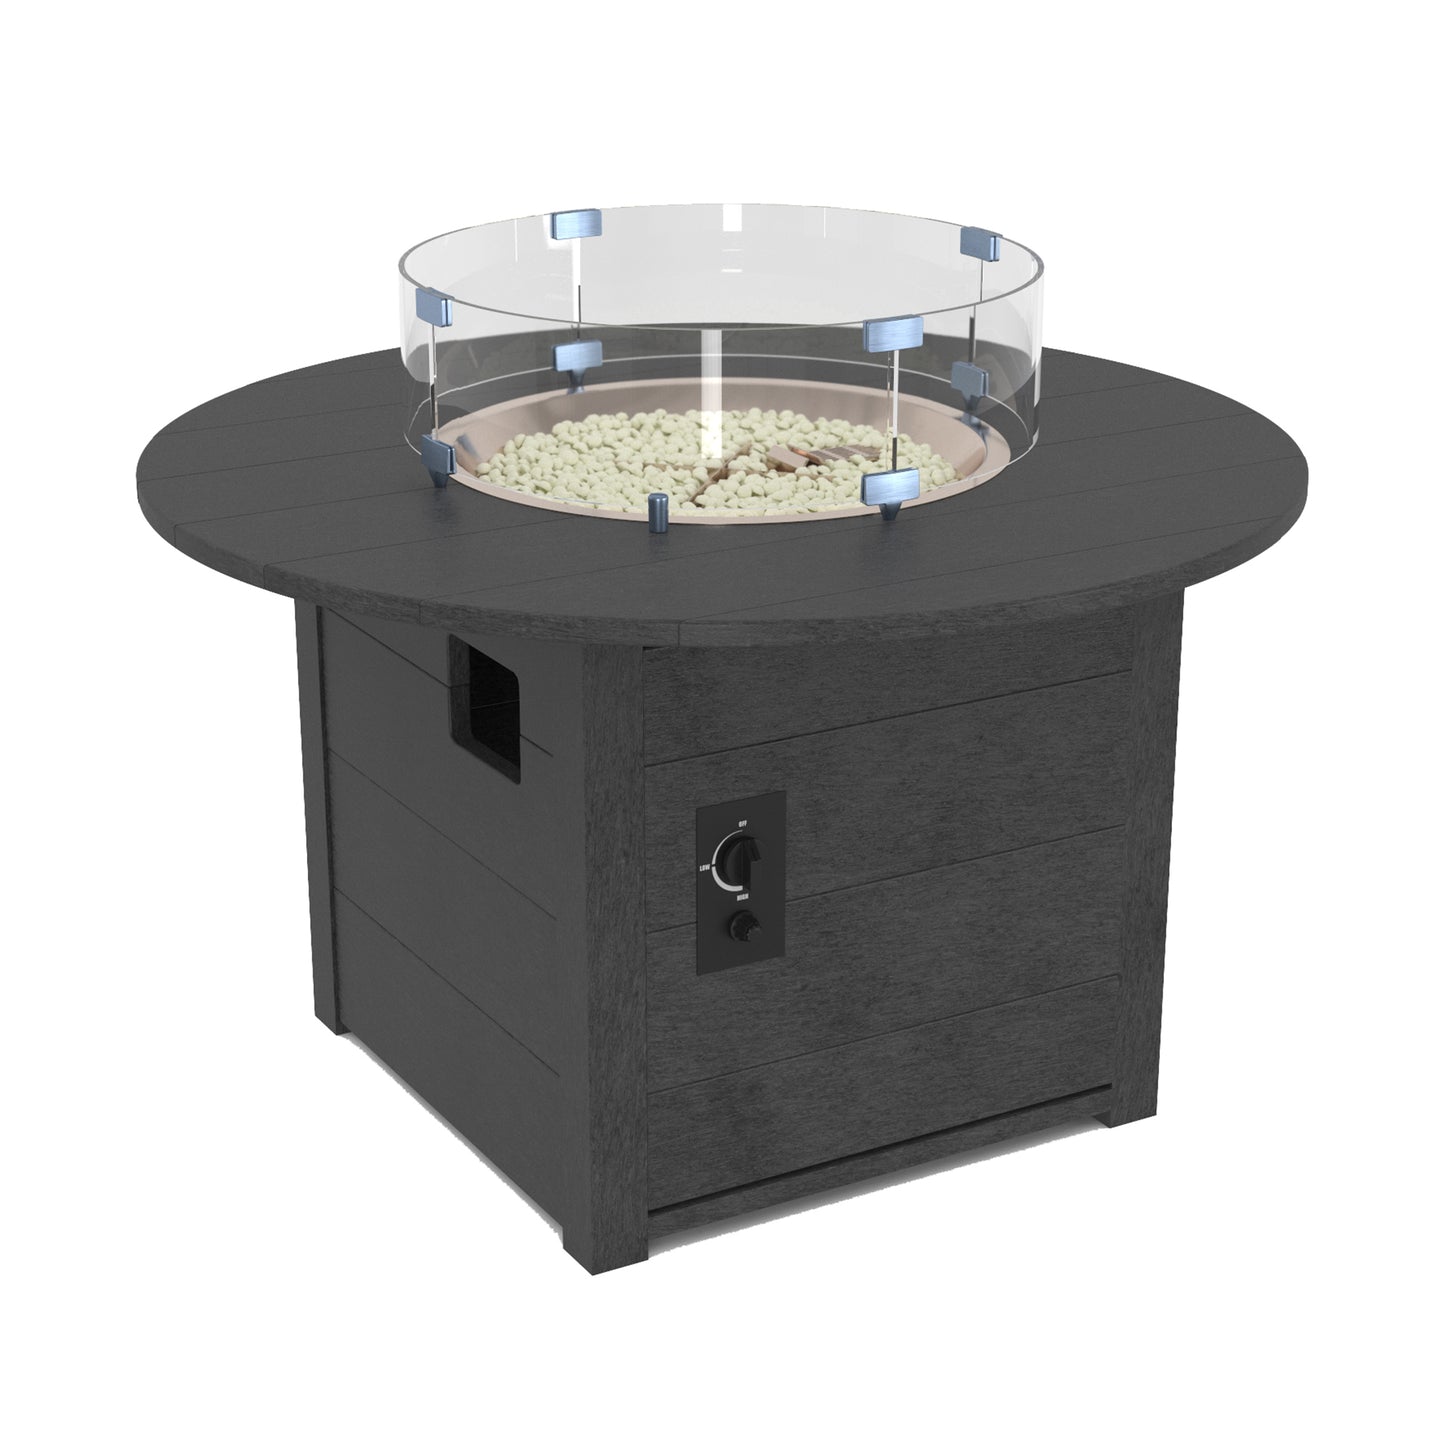 46" Round Fire Table